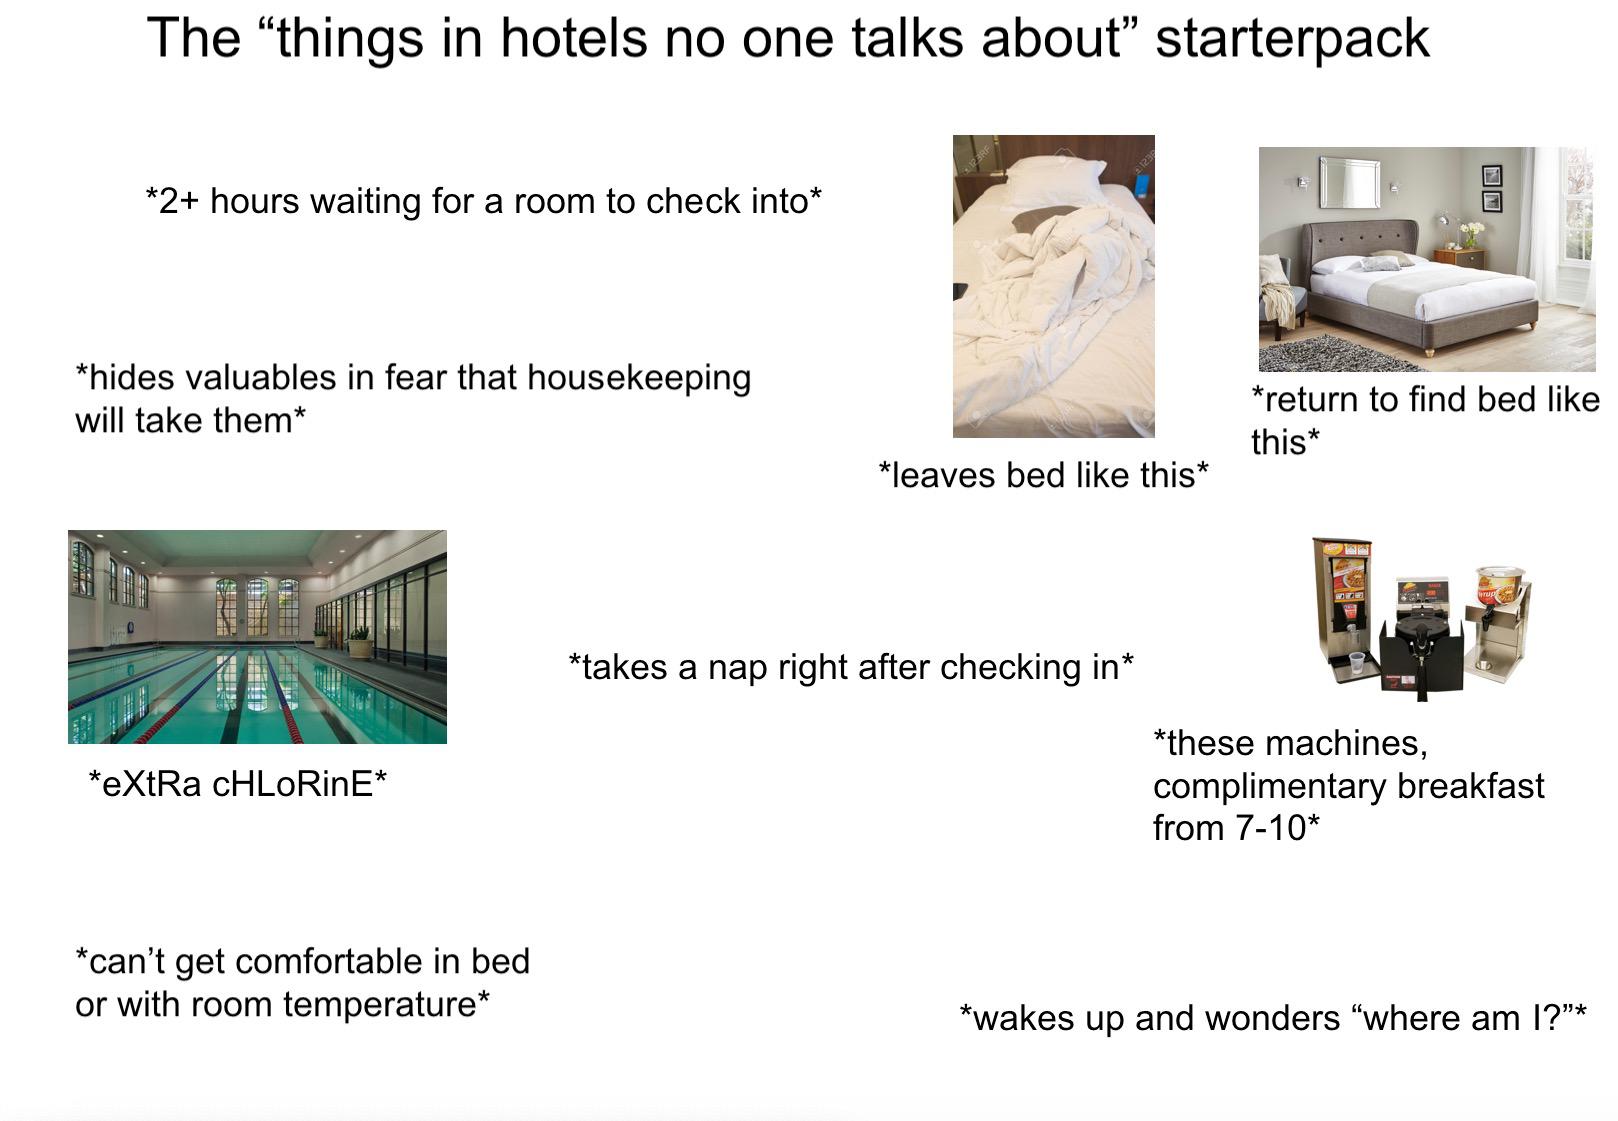 angle - The "things in hotels no one talks about" starterpack 2 hours waiting for a room to check into hides valuables in fear that housekeeping will take them return to find bed this leaves bed this takes a nap right after checking in eXtRa Chlorine thes